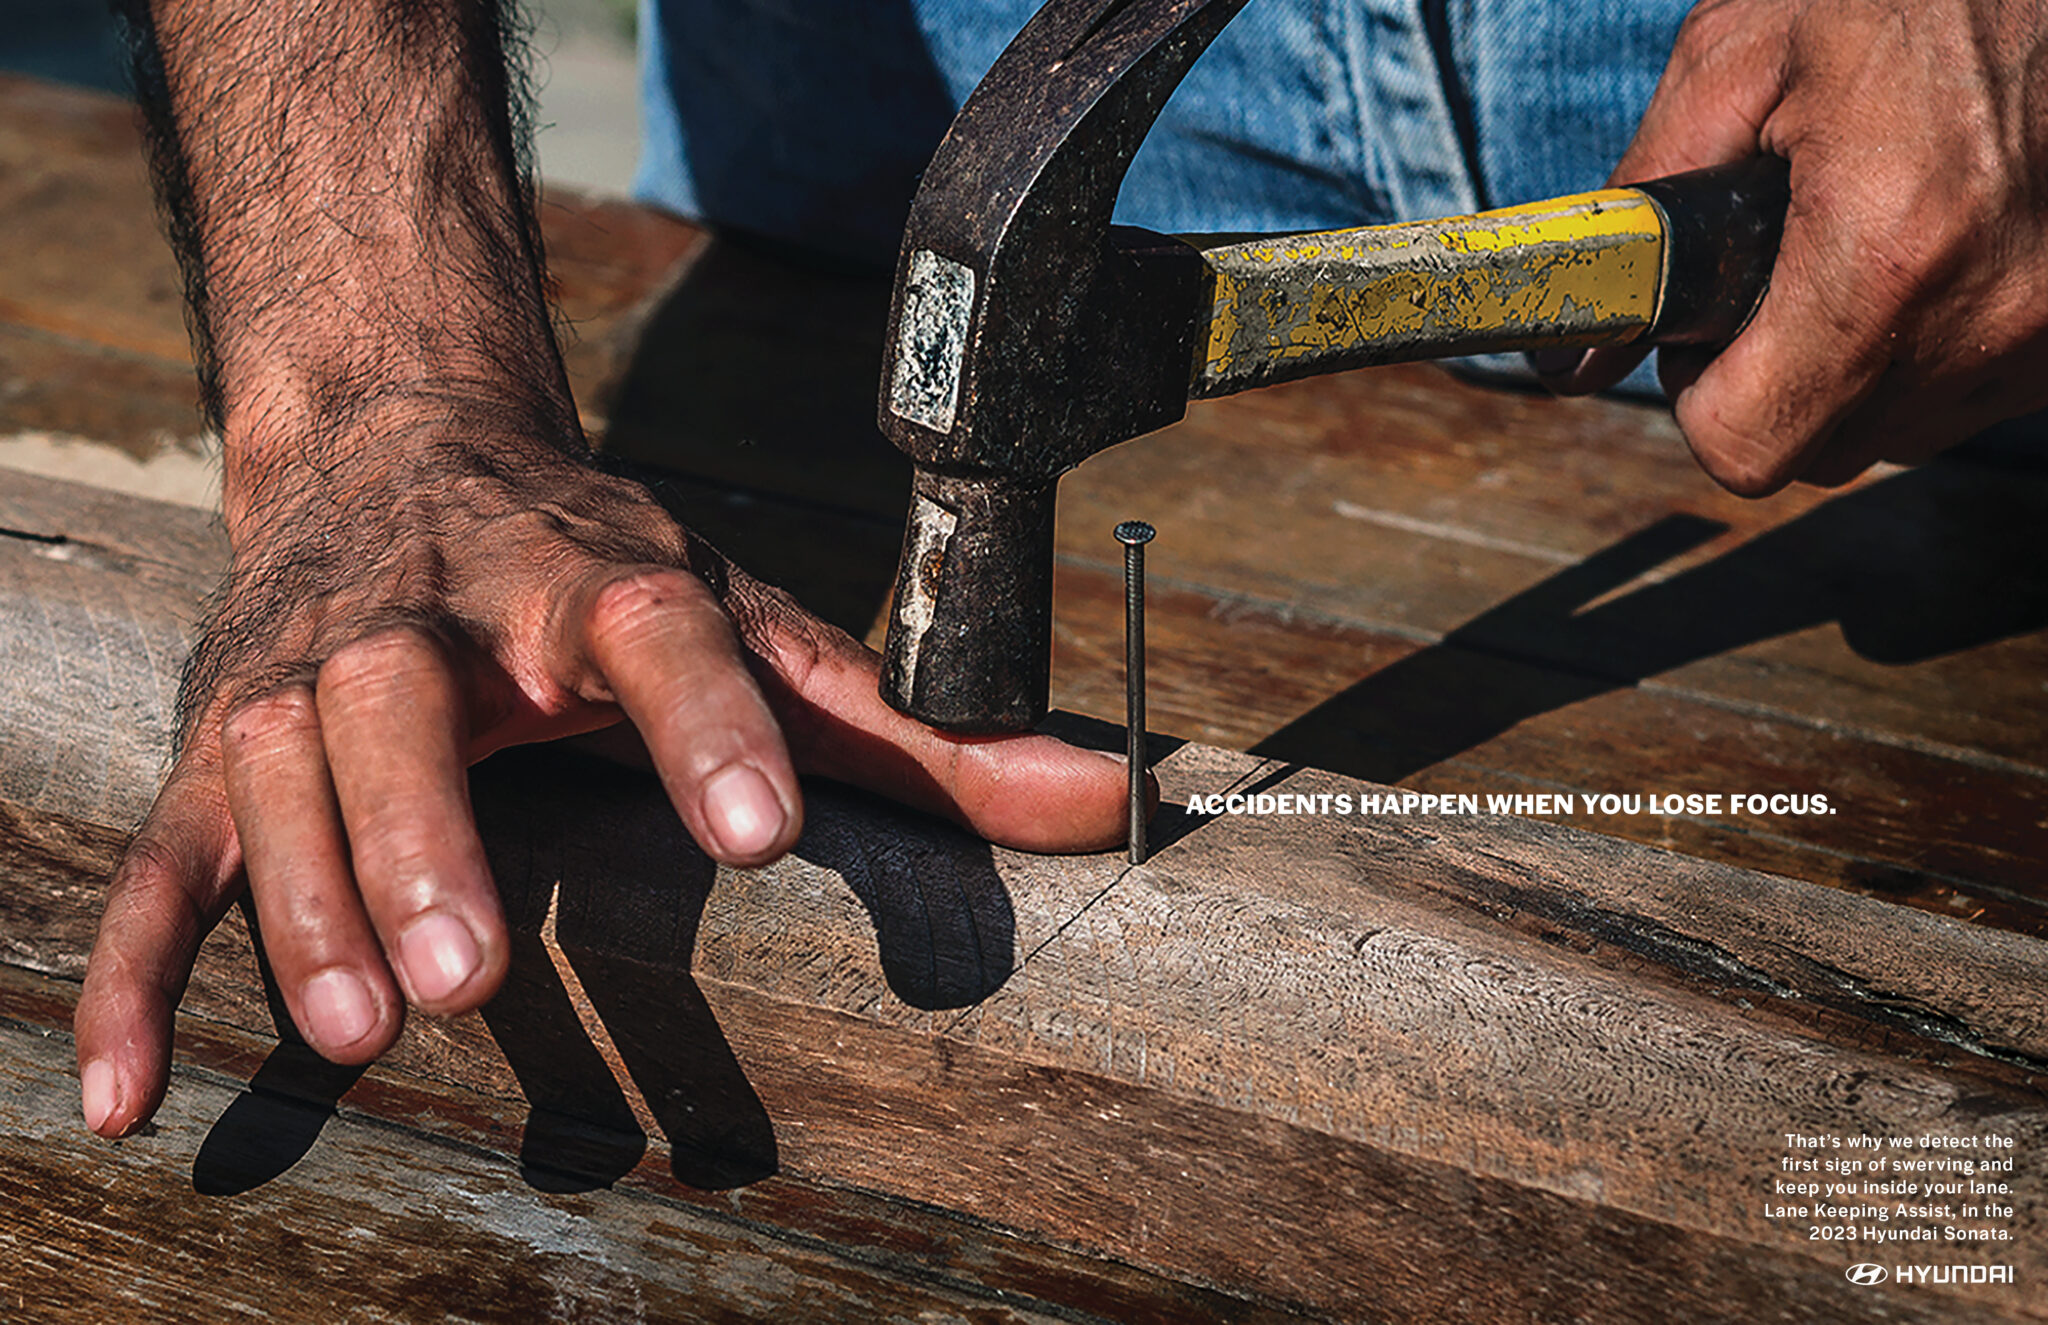 Hyundai car ad that shows a person hitting their thumb with a hammer and the text "Accidents happen when you lose focus"